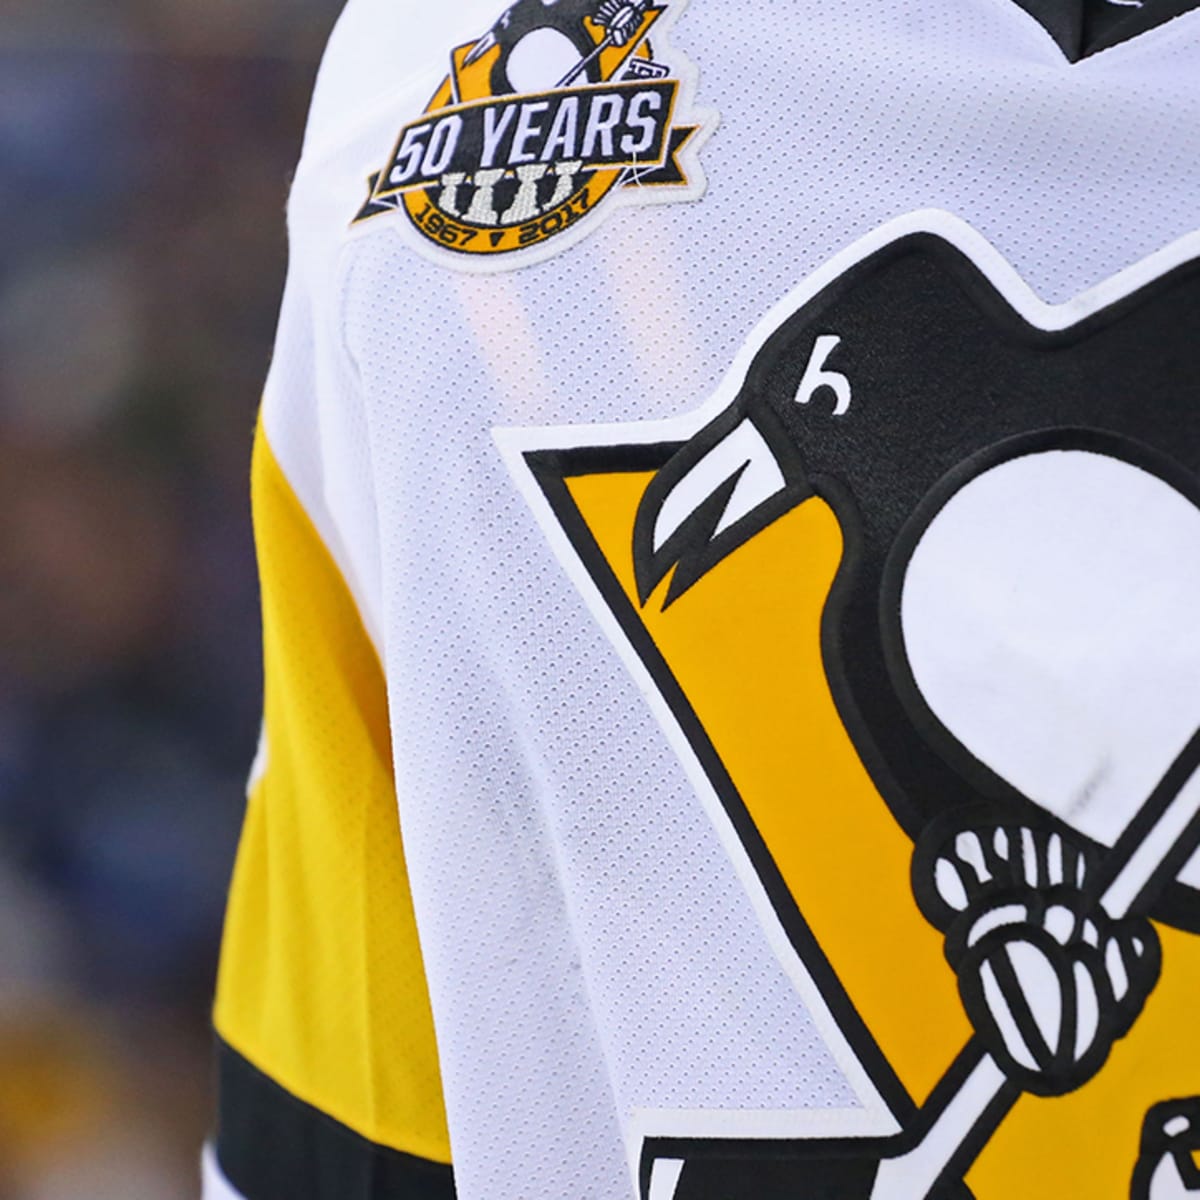 Mario Lemieux remains part of Penguins' ownership group after sale of team